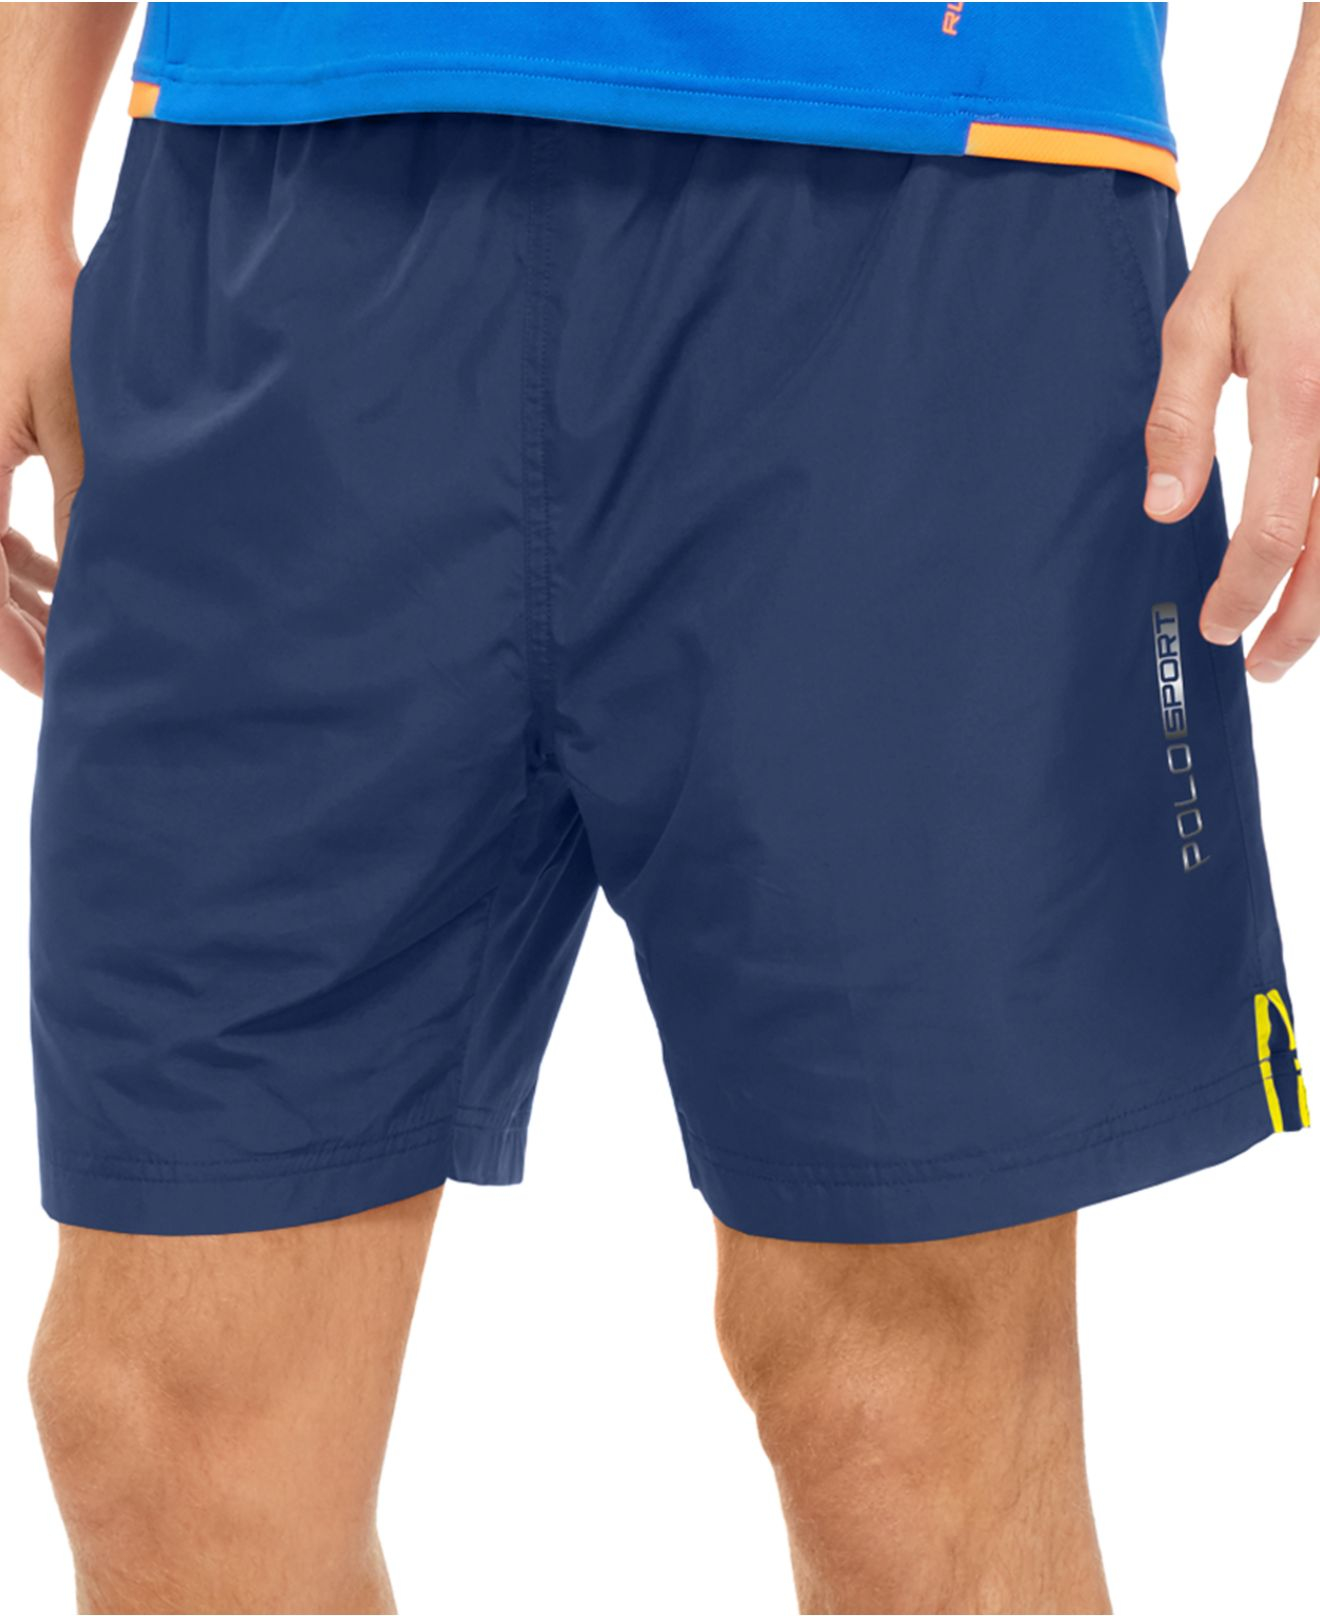 Lyst - Polo Ralph Lauren Polo Sport Arena Athletic Shorts in Blue for Men